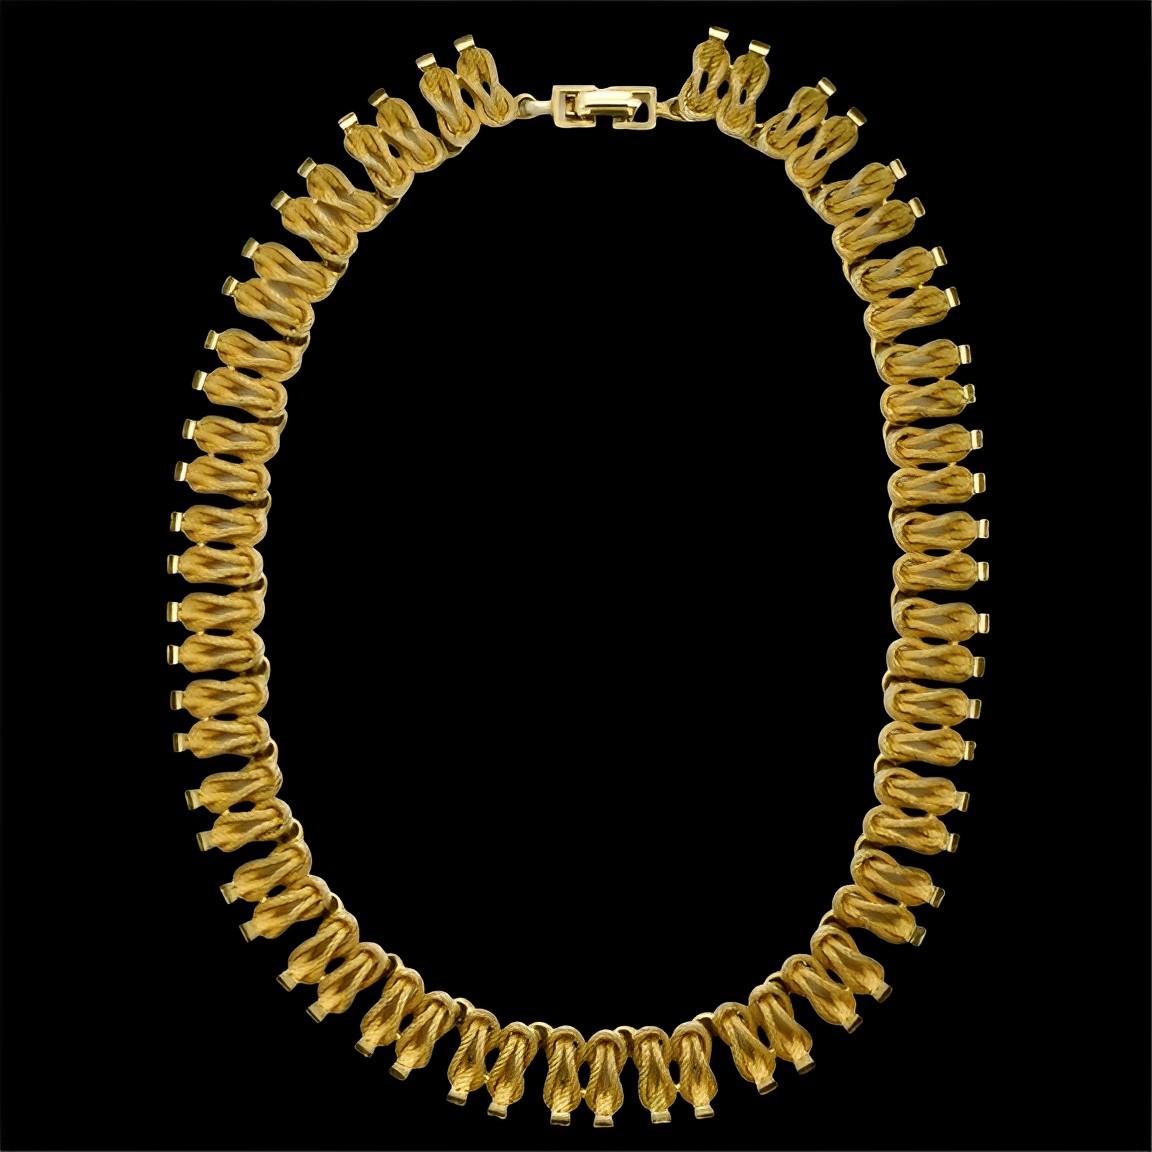 Gold Plated Textured Knot Design Link Necklace circa 1950s For Sale 4